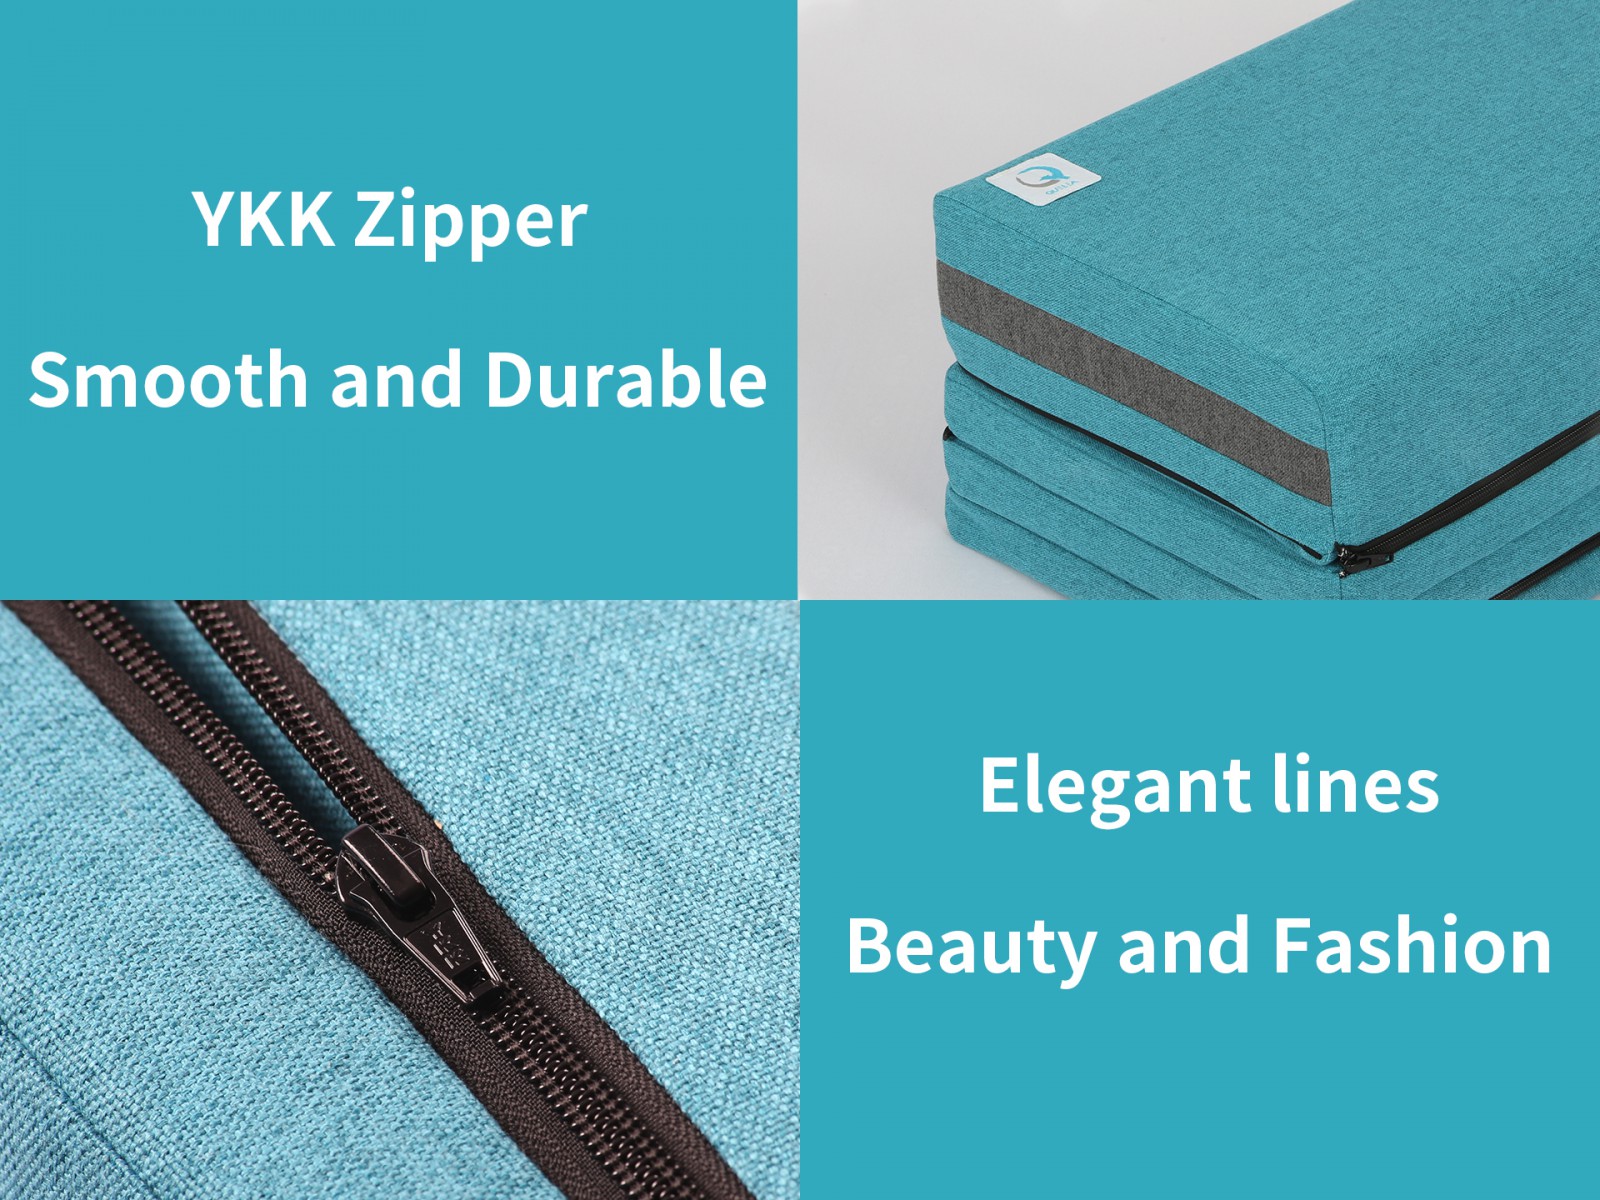 YKK zipper Smooth and Durable